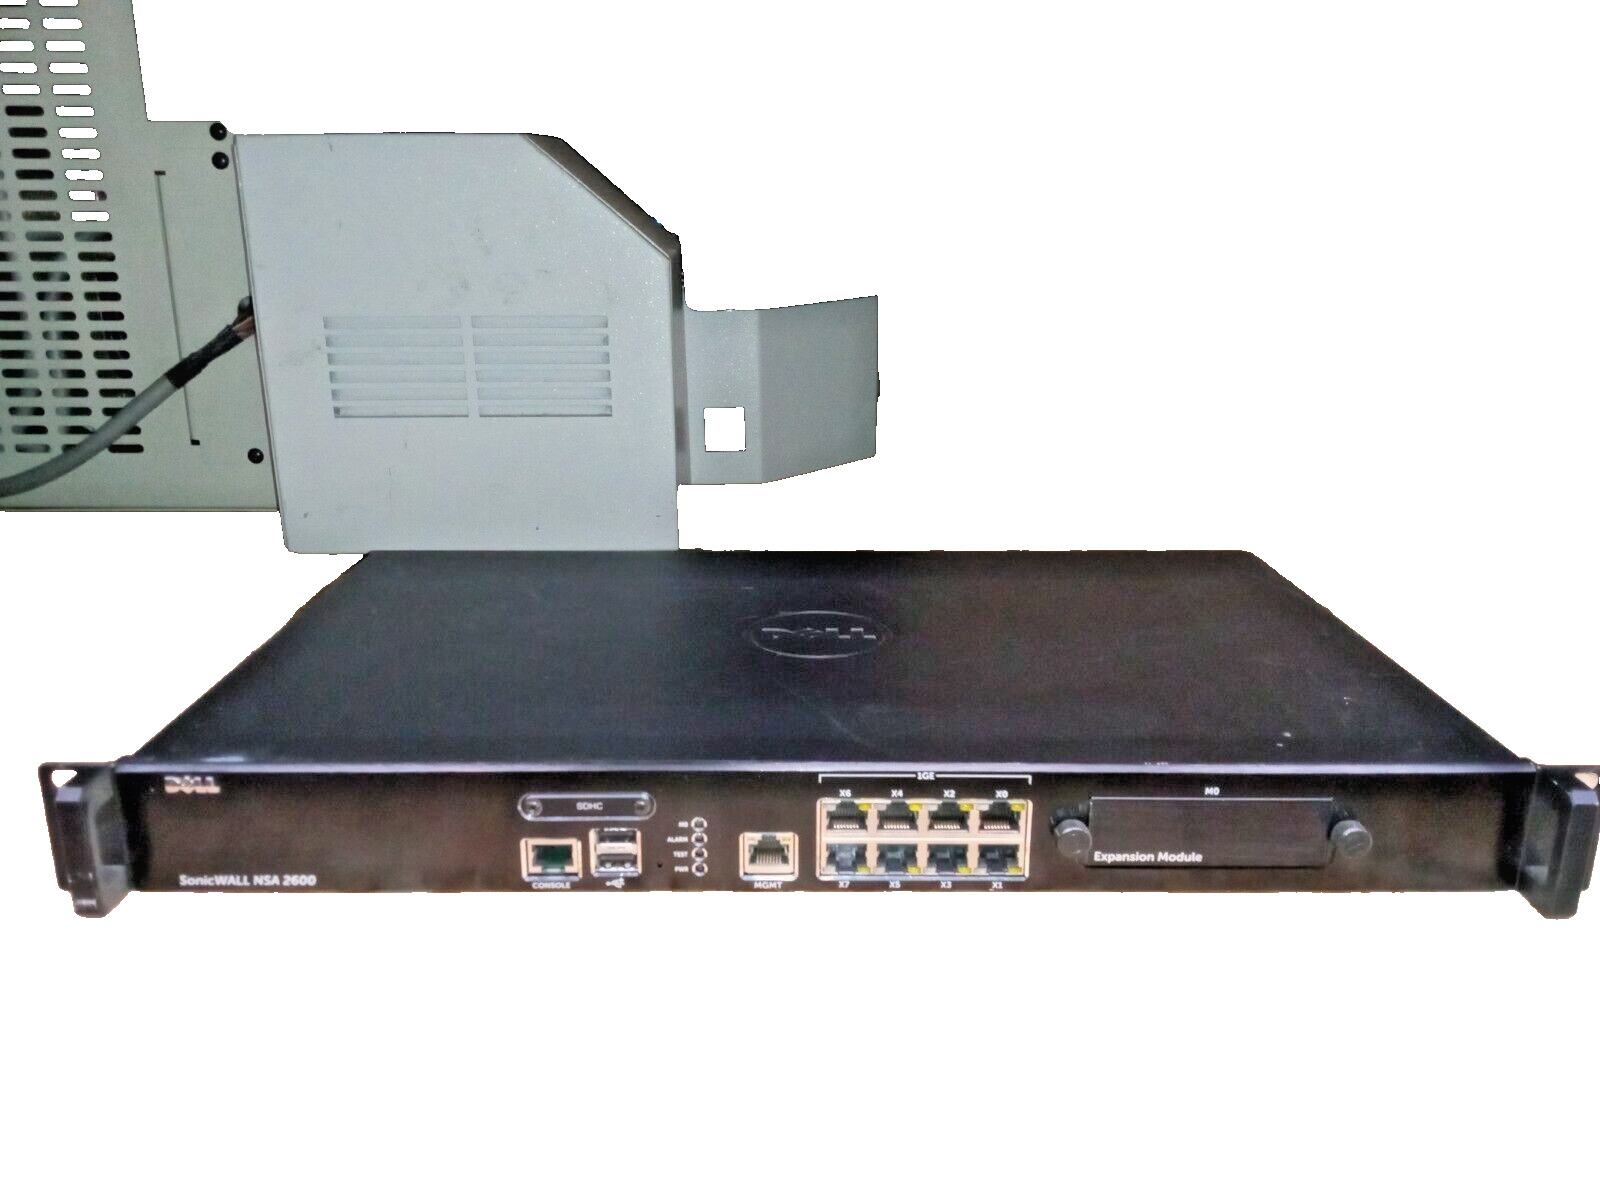 Dell SonicWall NSA 2600 8-Port Network Security Appliance w/ RACK EARS -TESTED